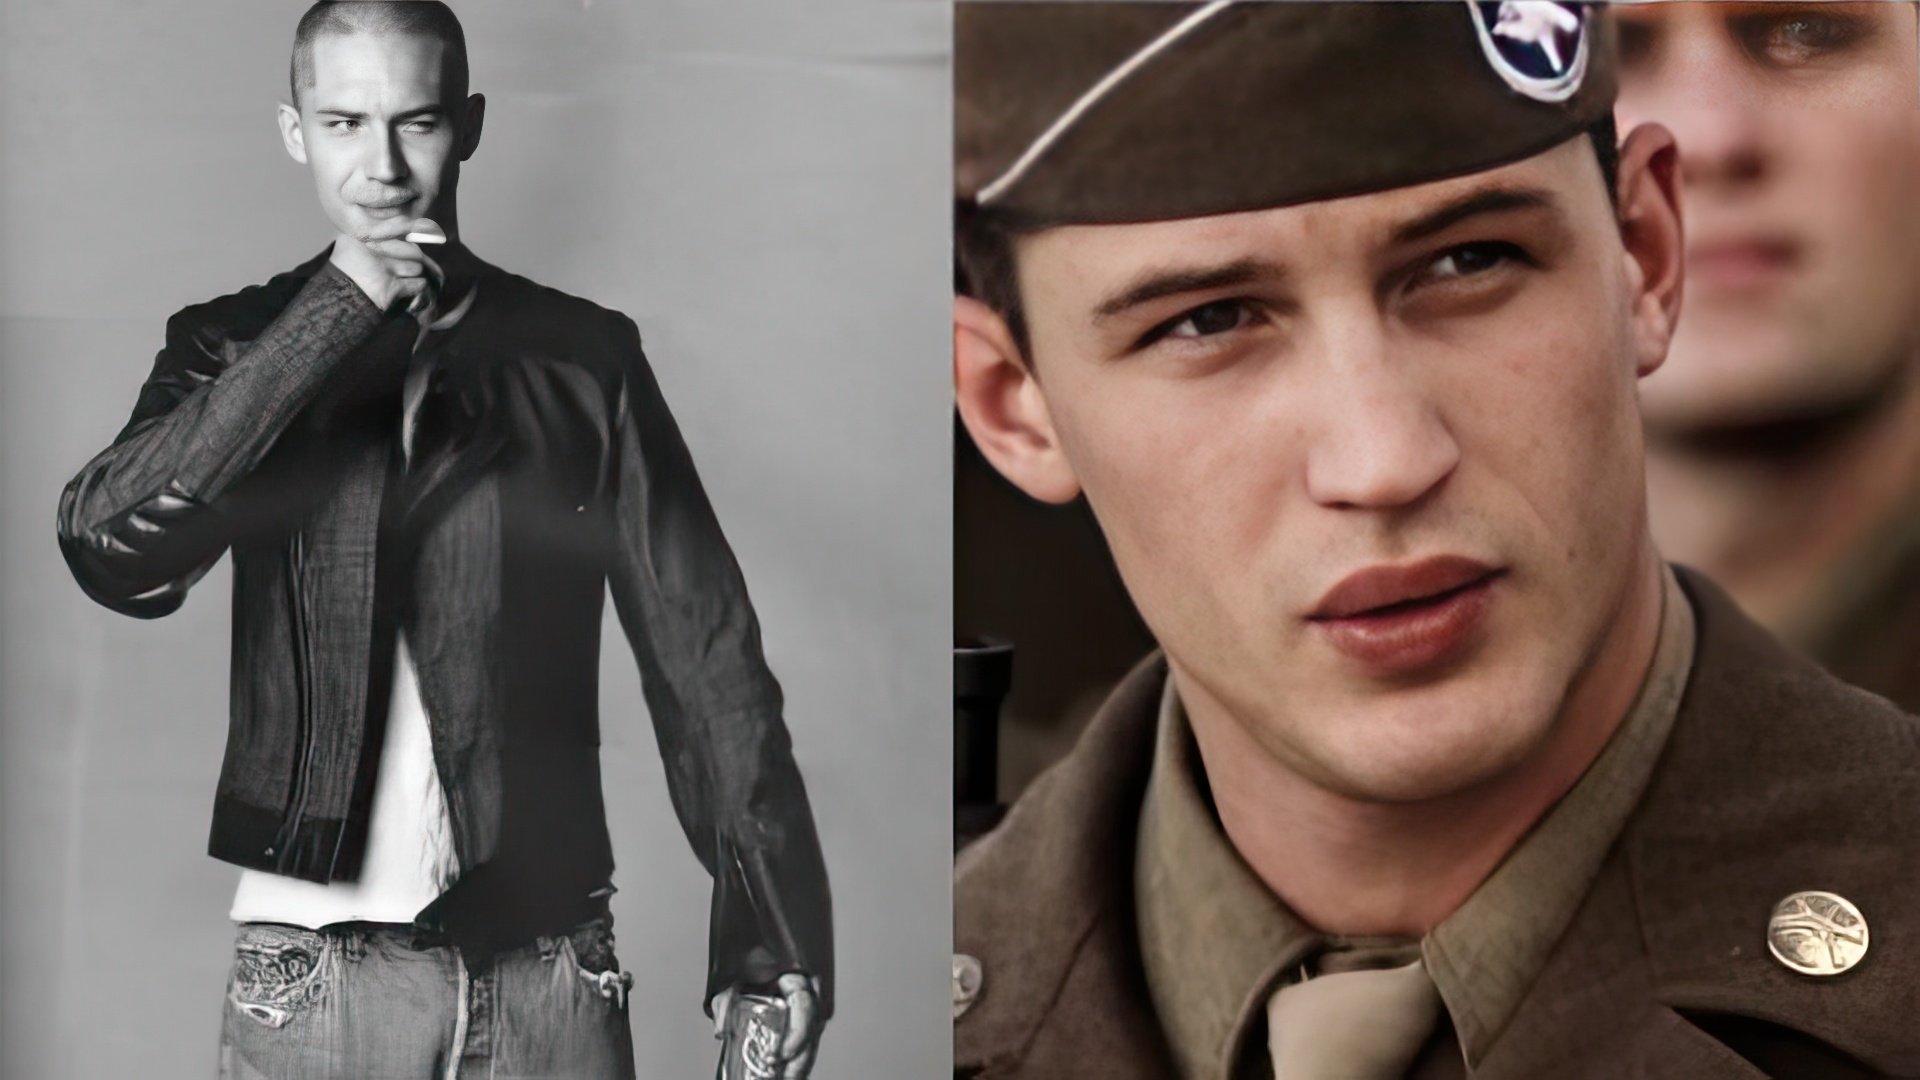 Tom Hardy in the “Band of Brothers” TV series from the right